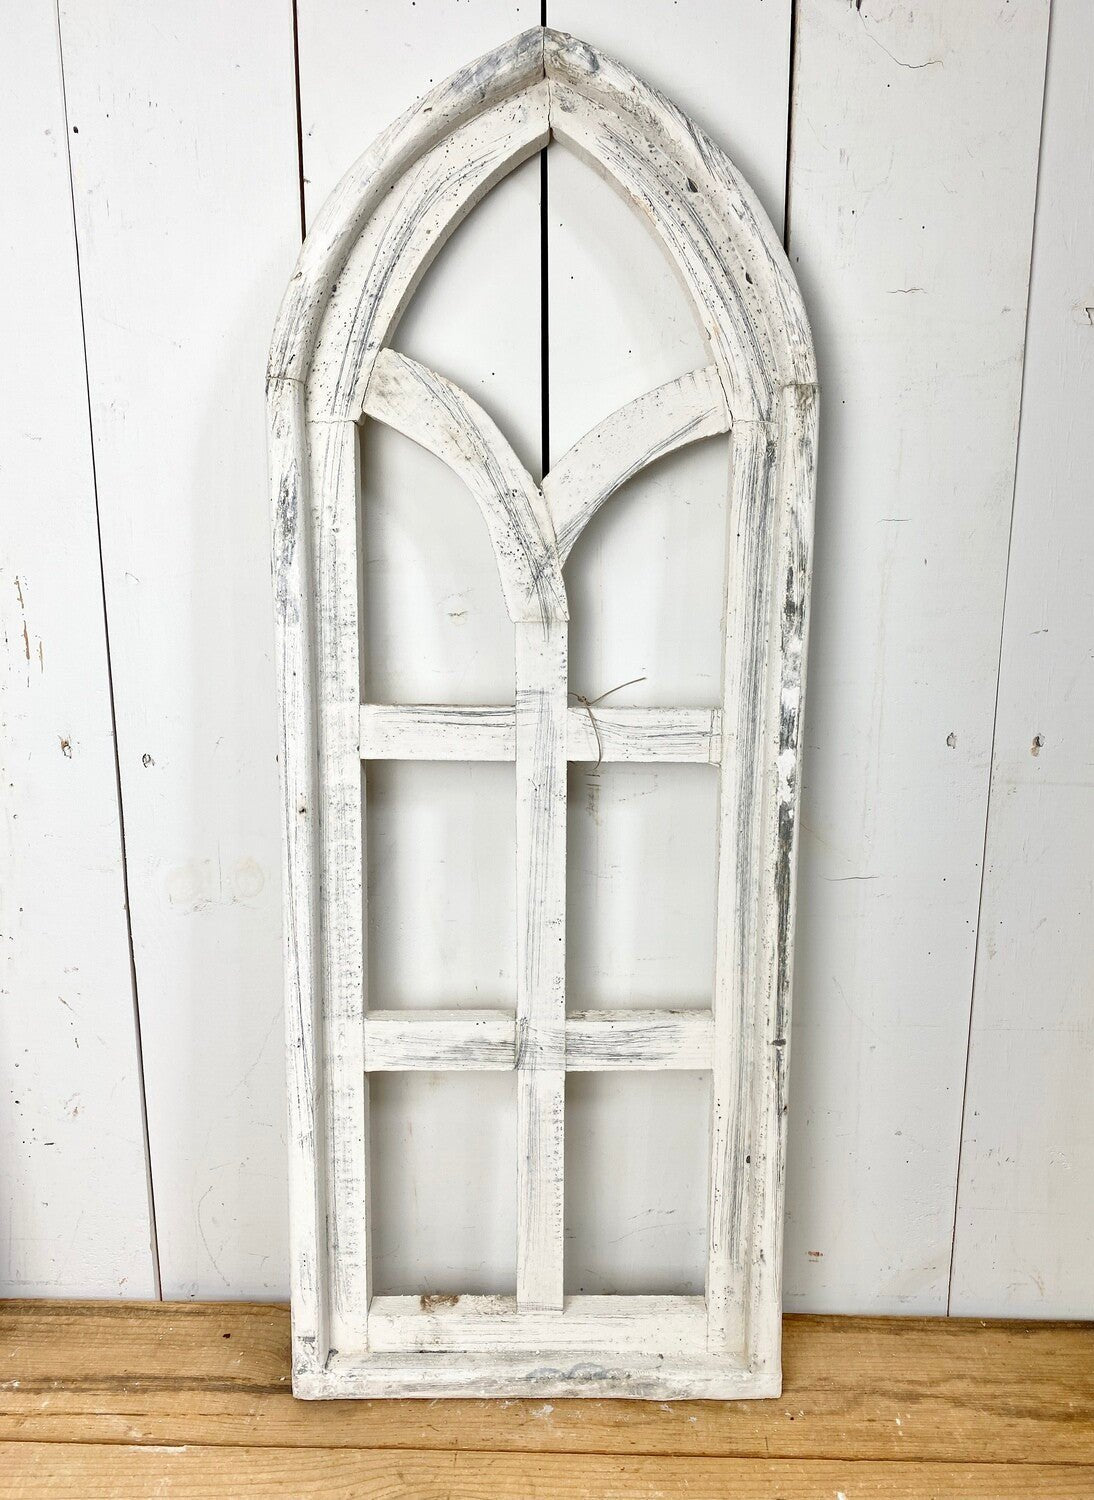 White Washed Arched Church Windows